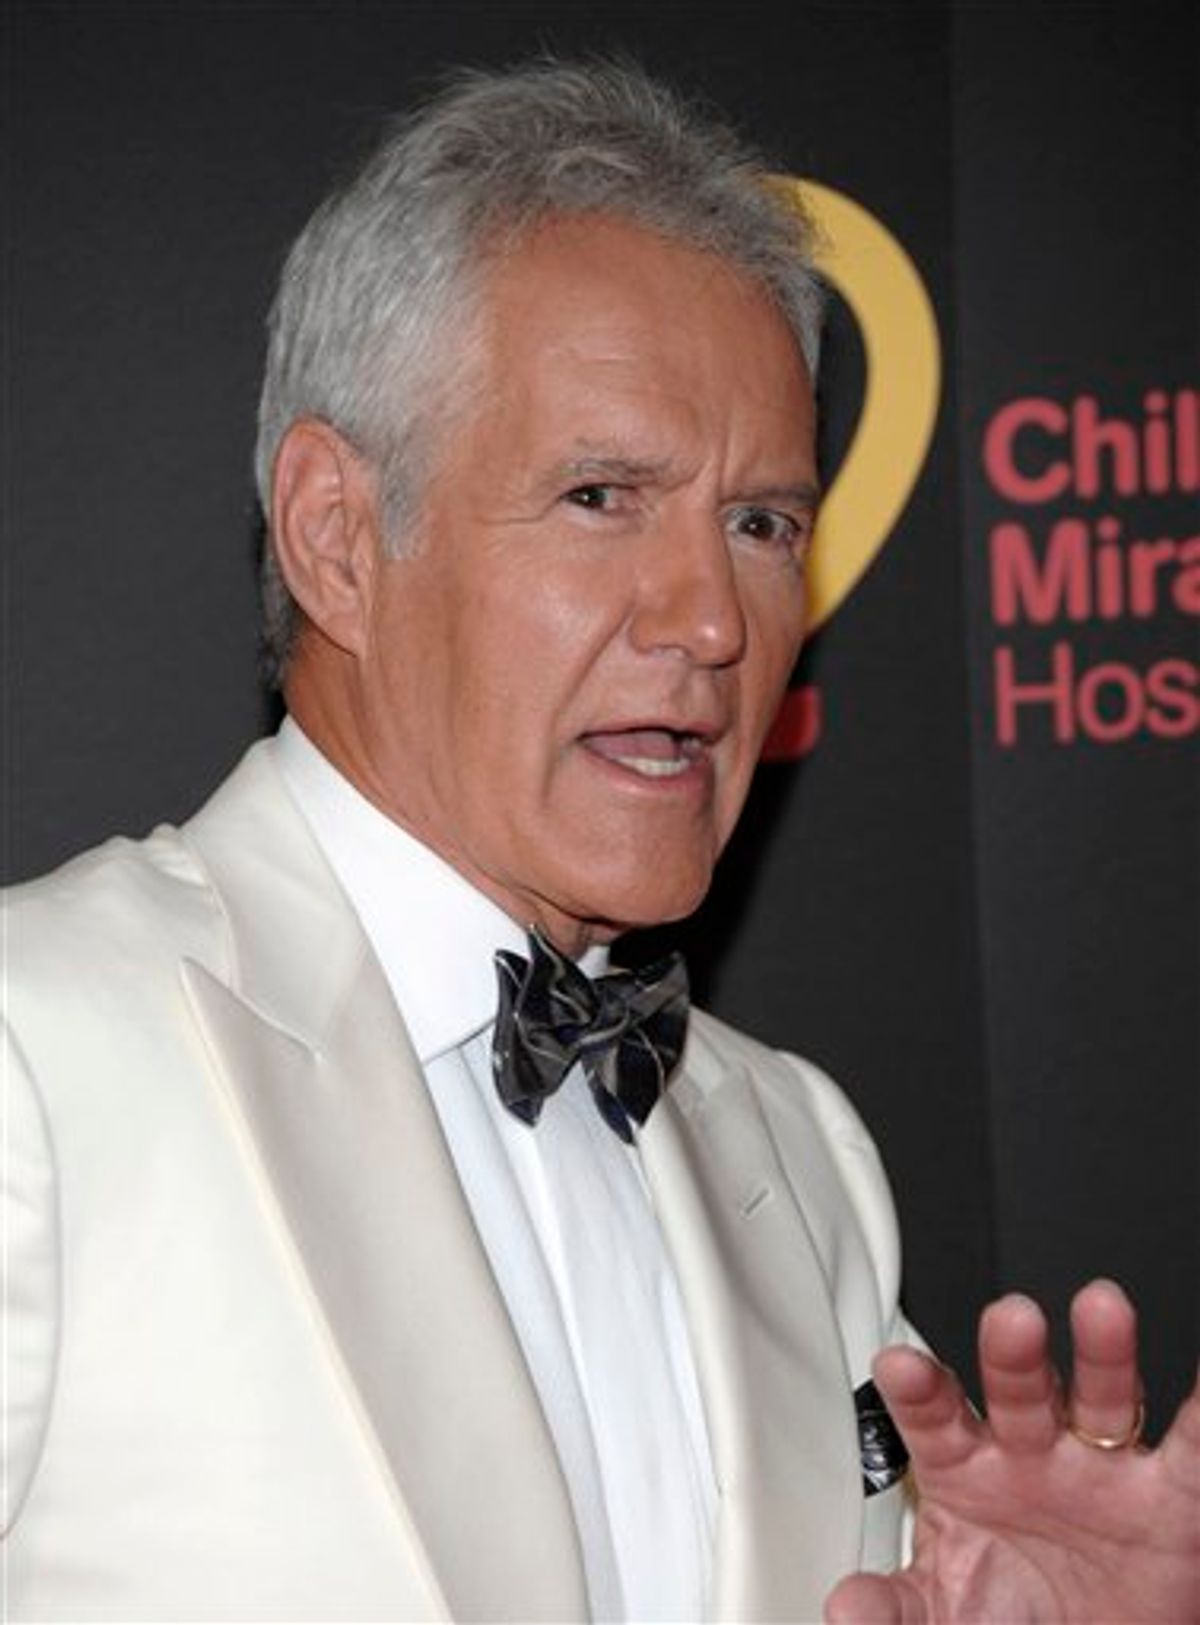 Television personality Alex Trebek arrives at the 38th Annual Daytime Emmy Awards in Las Vegas on Sunday, June 19, 2011. (AP Photo/Dan Steinberg)     (AP)